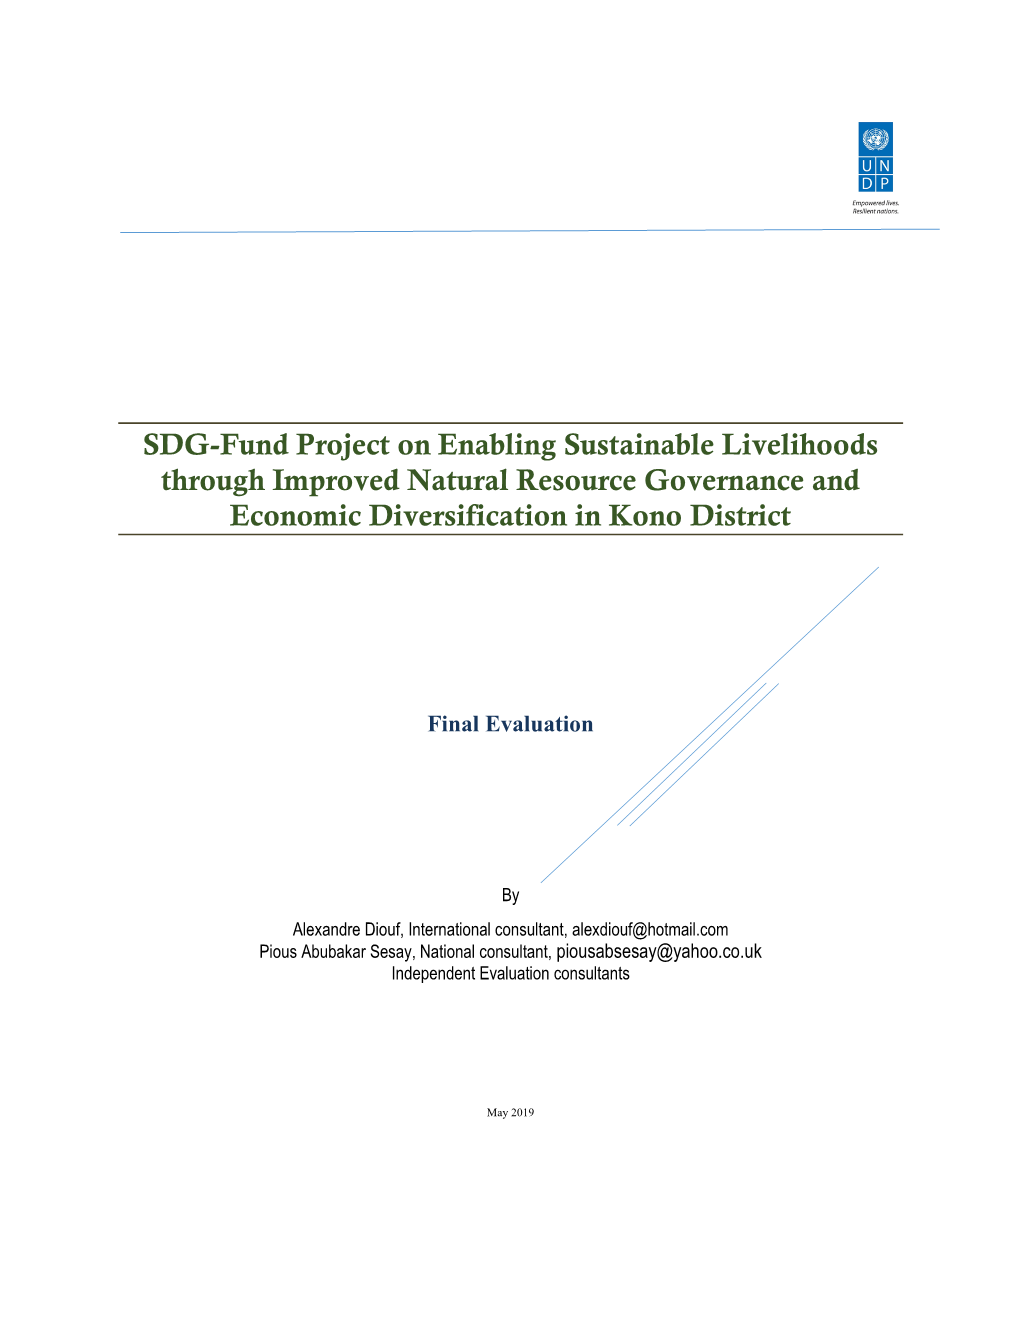 Enabling Sustainable Livelihoods Through Improved Natural Resource Governance and Economic Diversification in Kono District